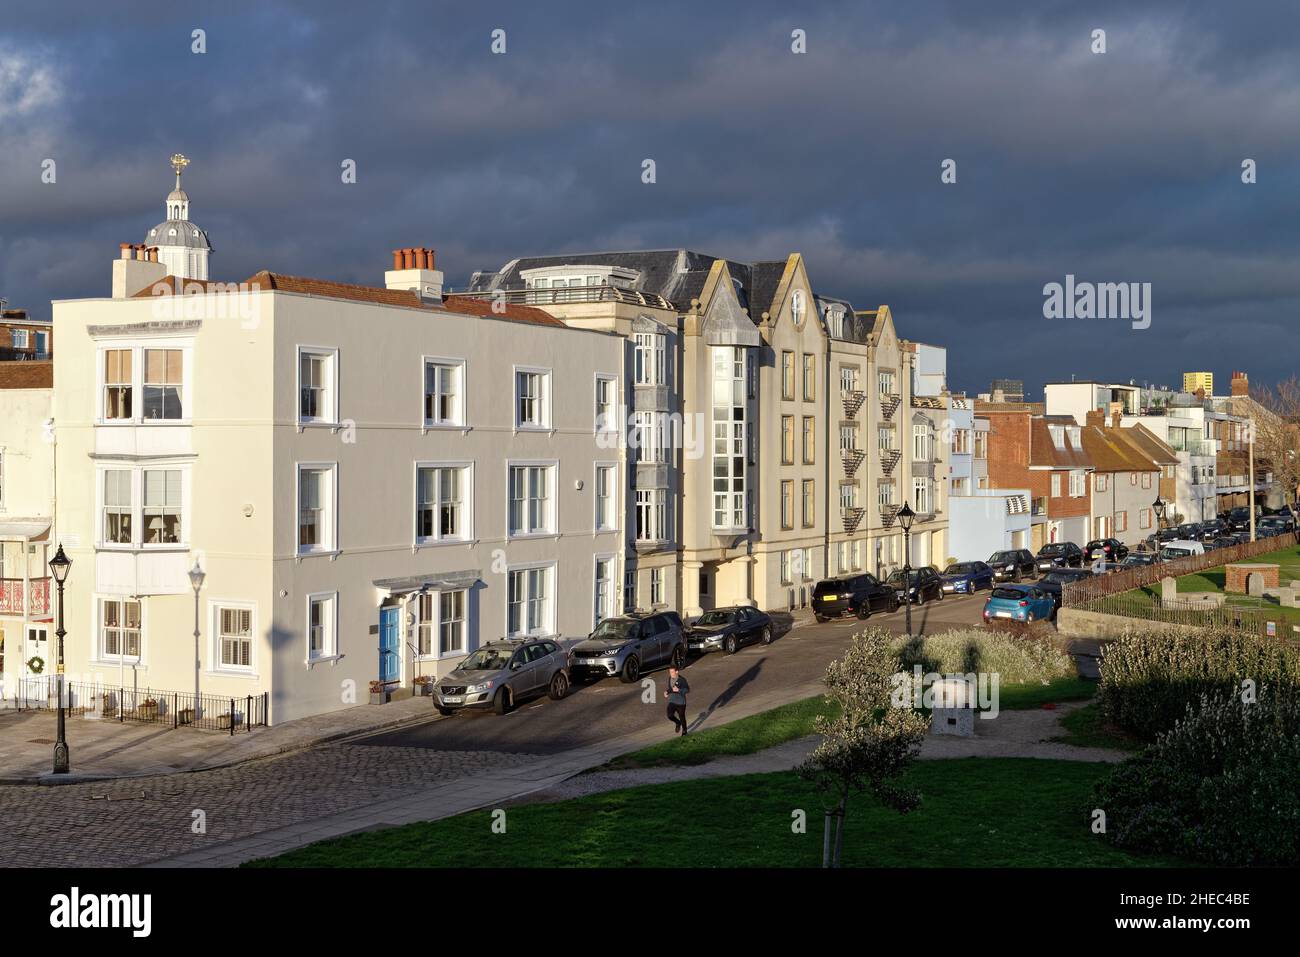 Old historic houses on Grand Parade and Penny Street illuminated by a dramatic winter sunset against a dark sky, old Portsmouth Hampshire England UK Stock Photo